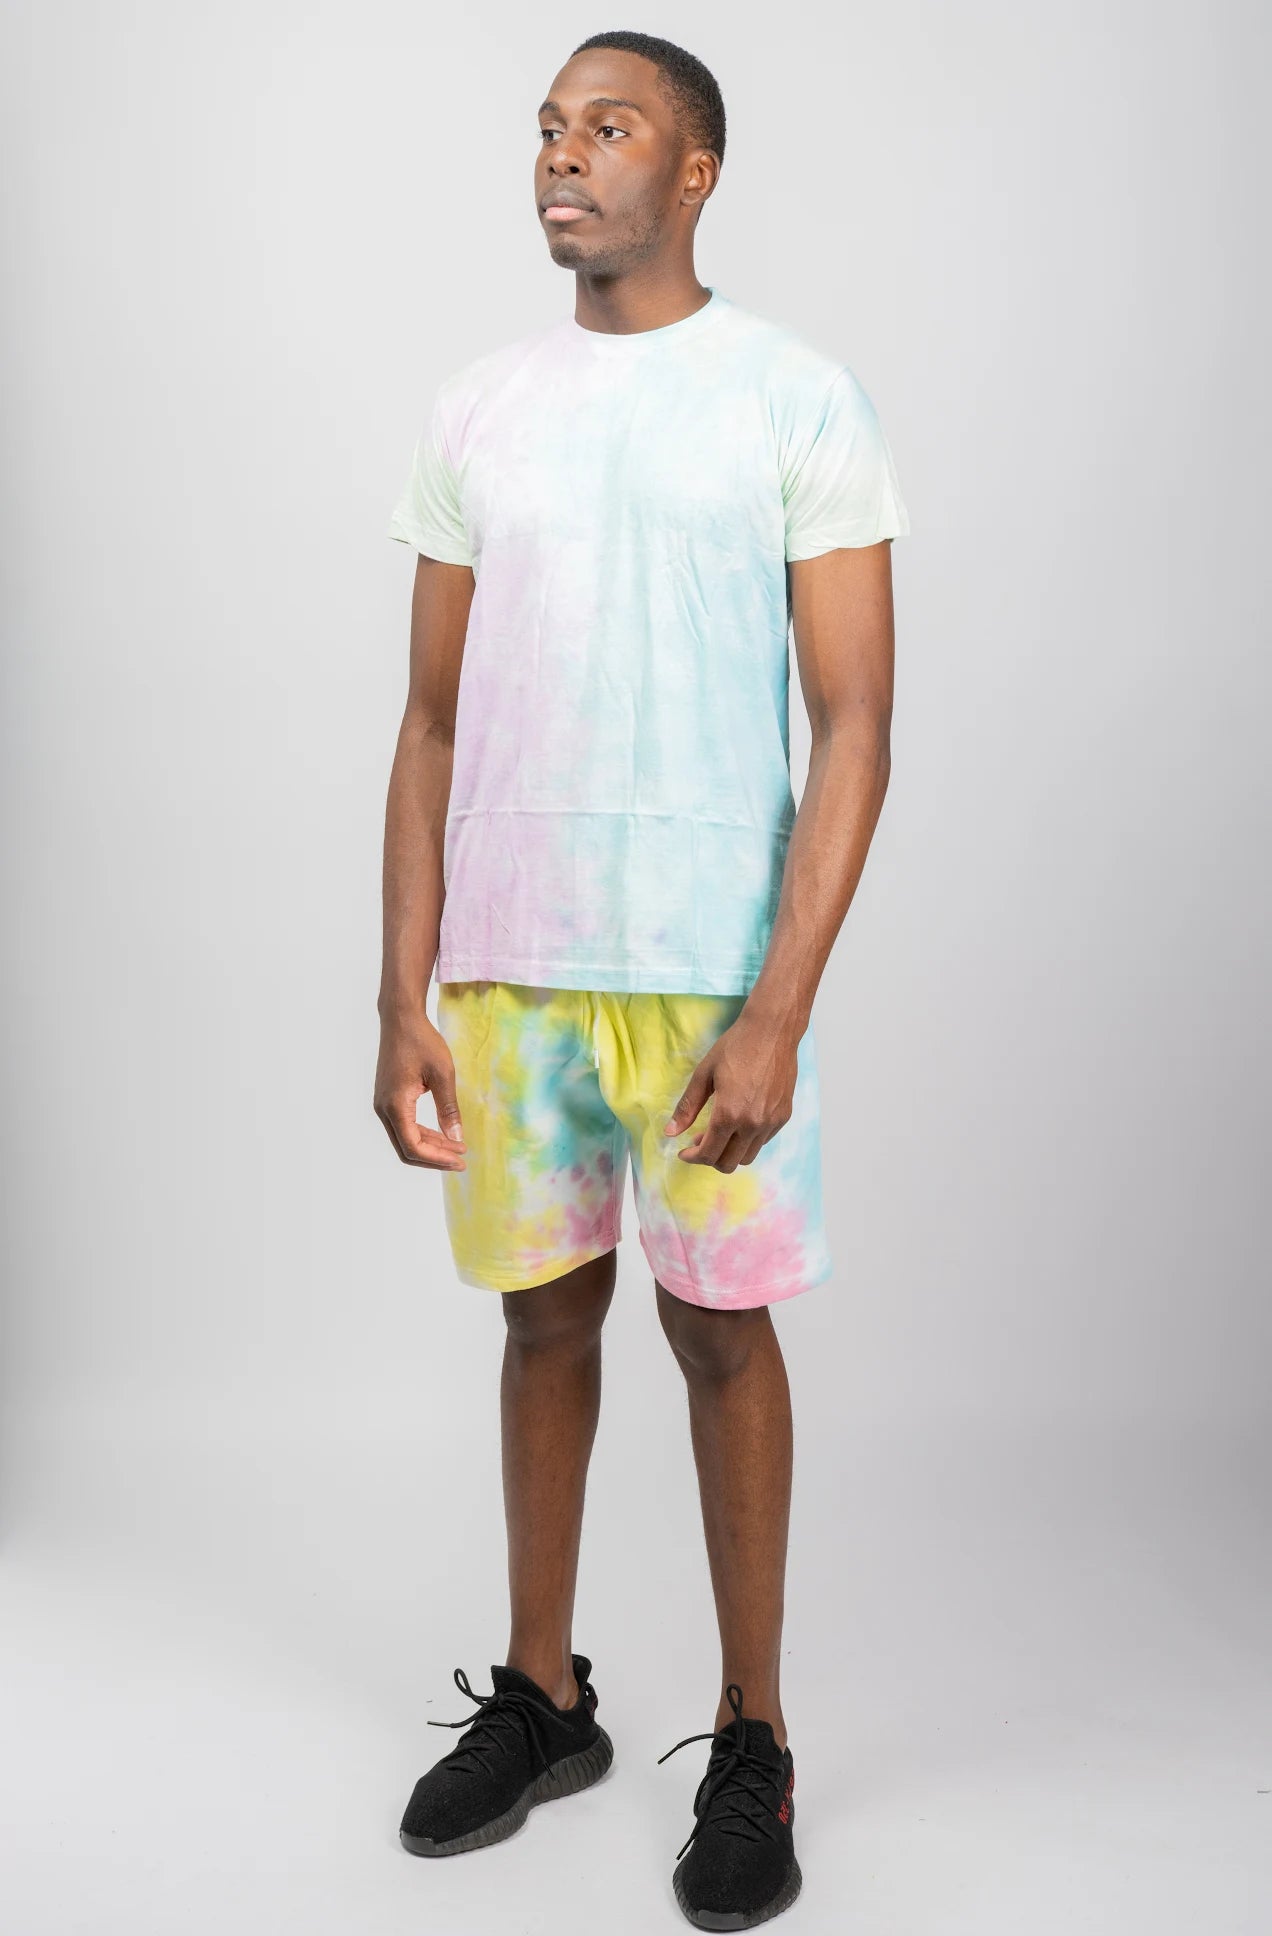 Cotton Candy T-shirt and short sets